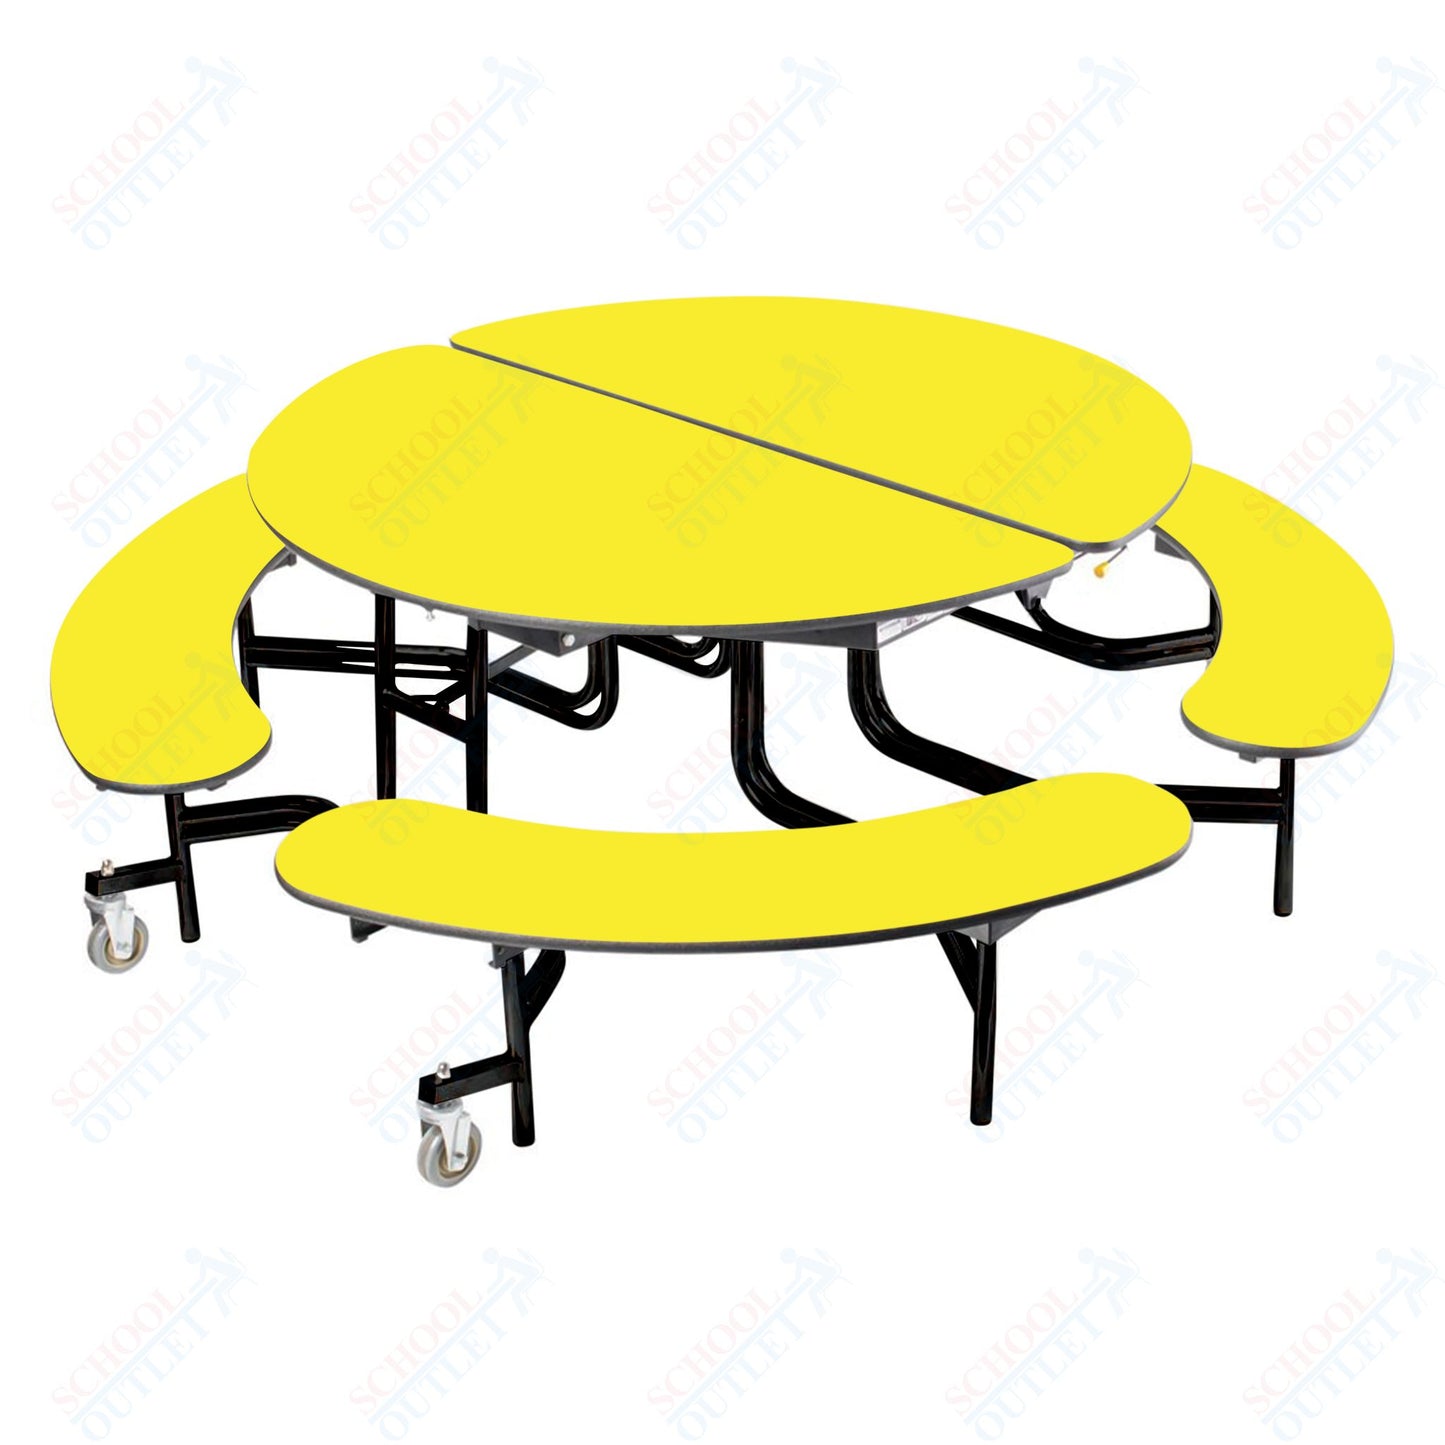 NPS Mobile Cafeteria 60" Round Bench Unit - Seats 8-12 (National Public Seating NPS-MTR60B)